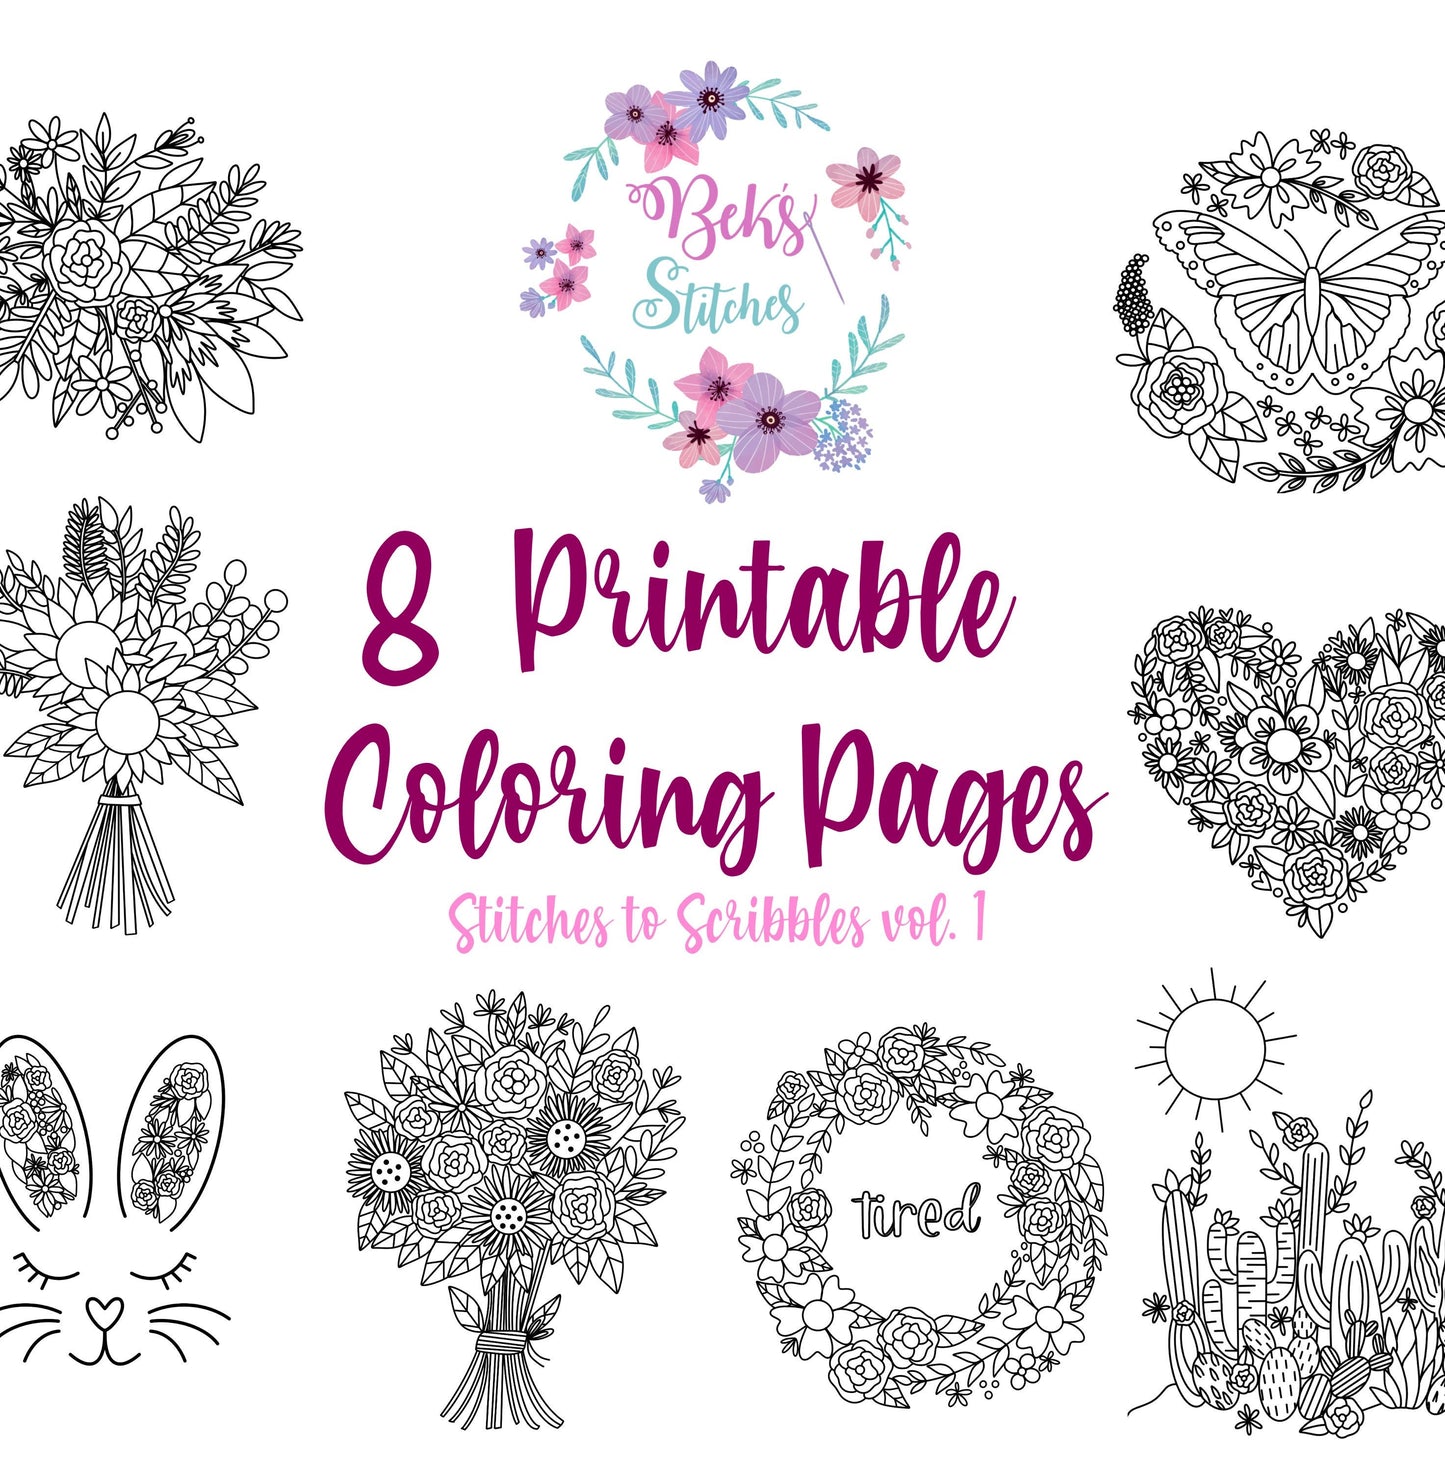 Printable PDF Coloring Pages - Stitches to Scribbles Volume 1 - 8 Original Coloring Pages